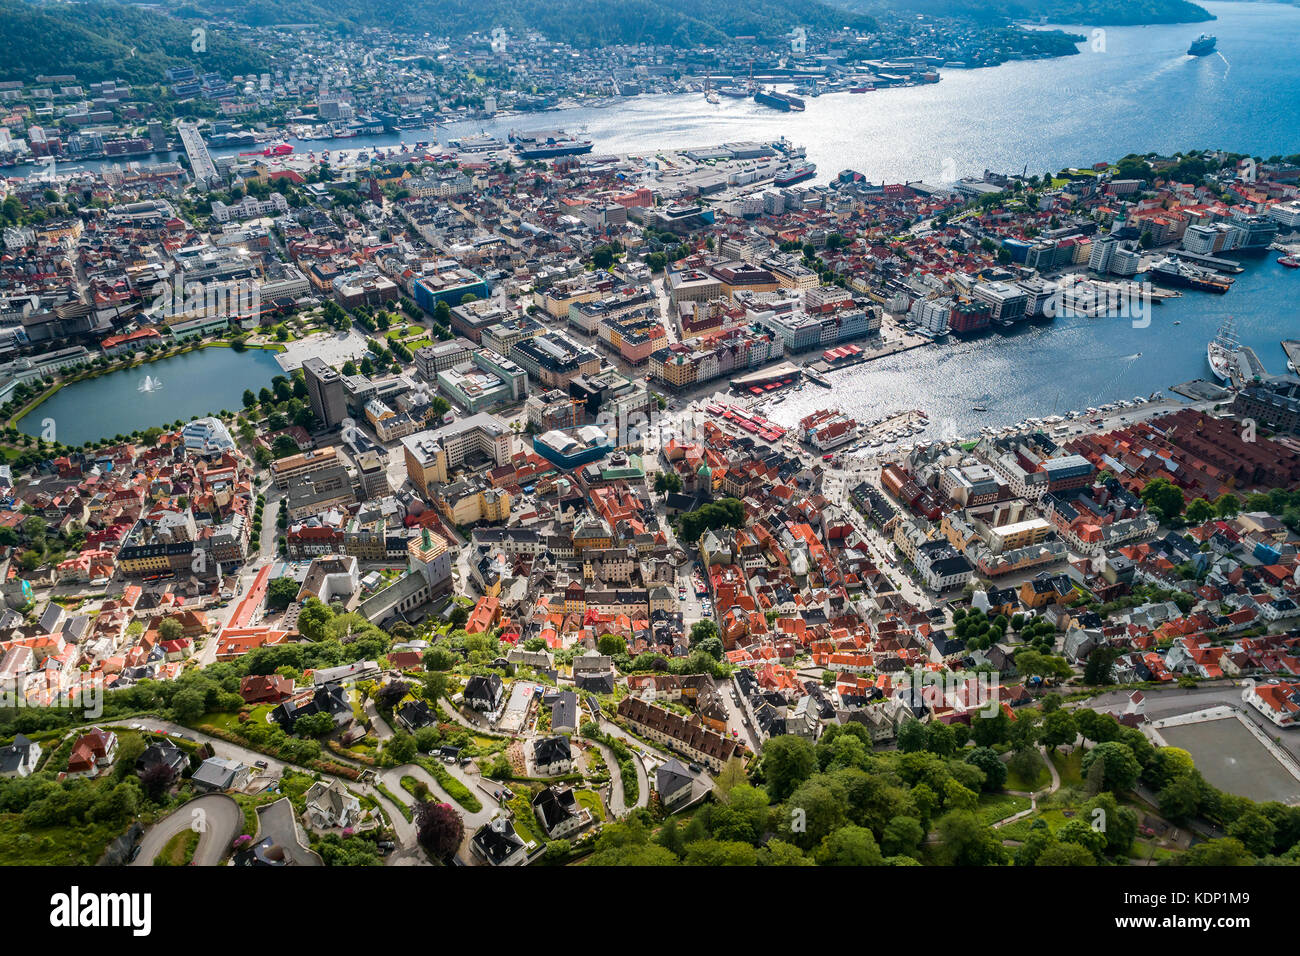 Bergen is a city and municipality in Hordaland on the west coast of Norway.  Bergen is the second-largest city in Norway. The view from the height of b  Stock Photo - Alamy